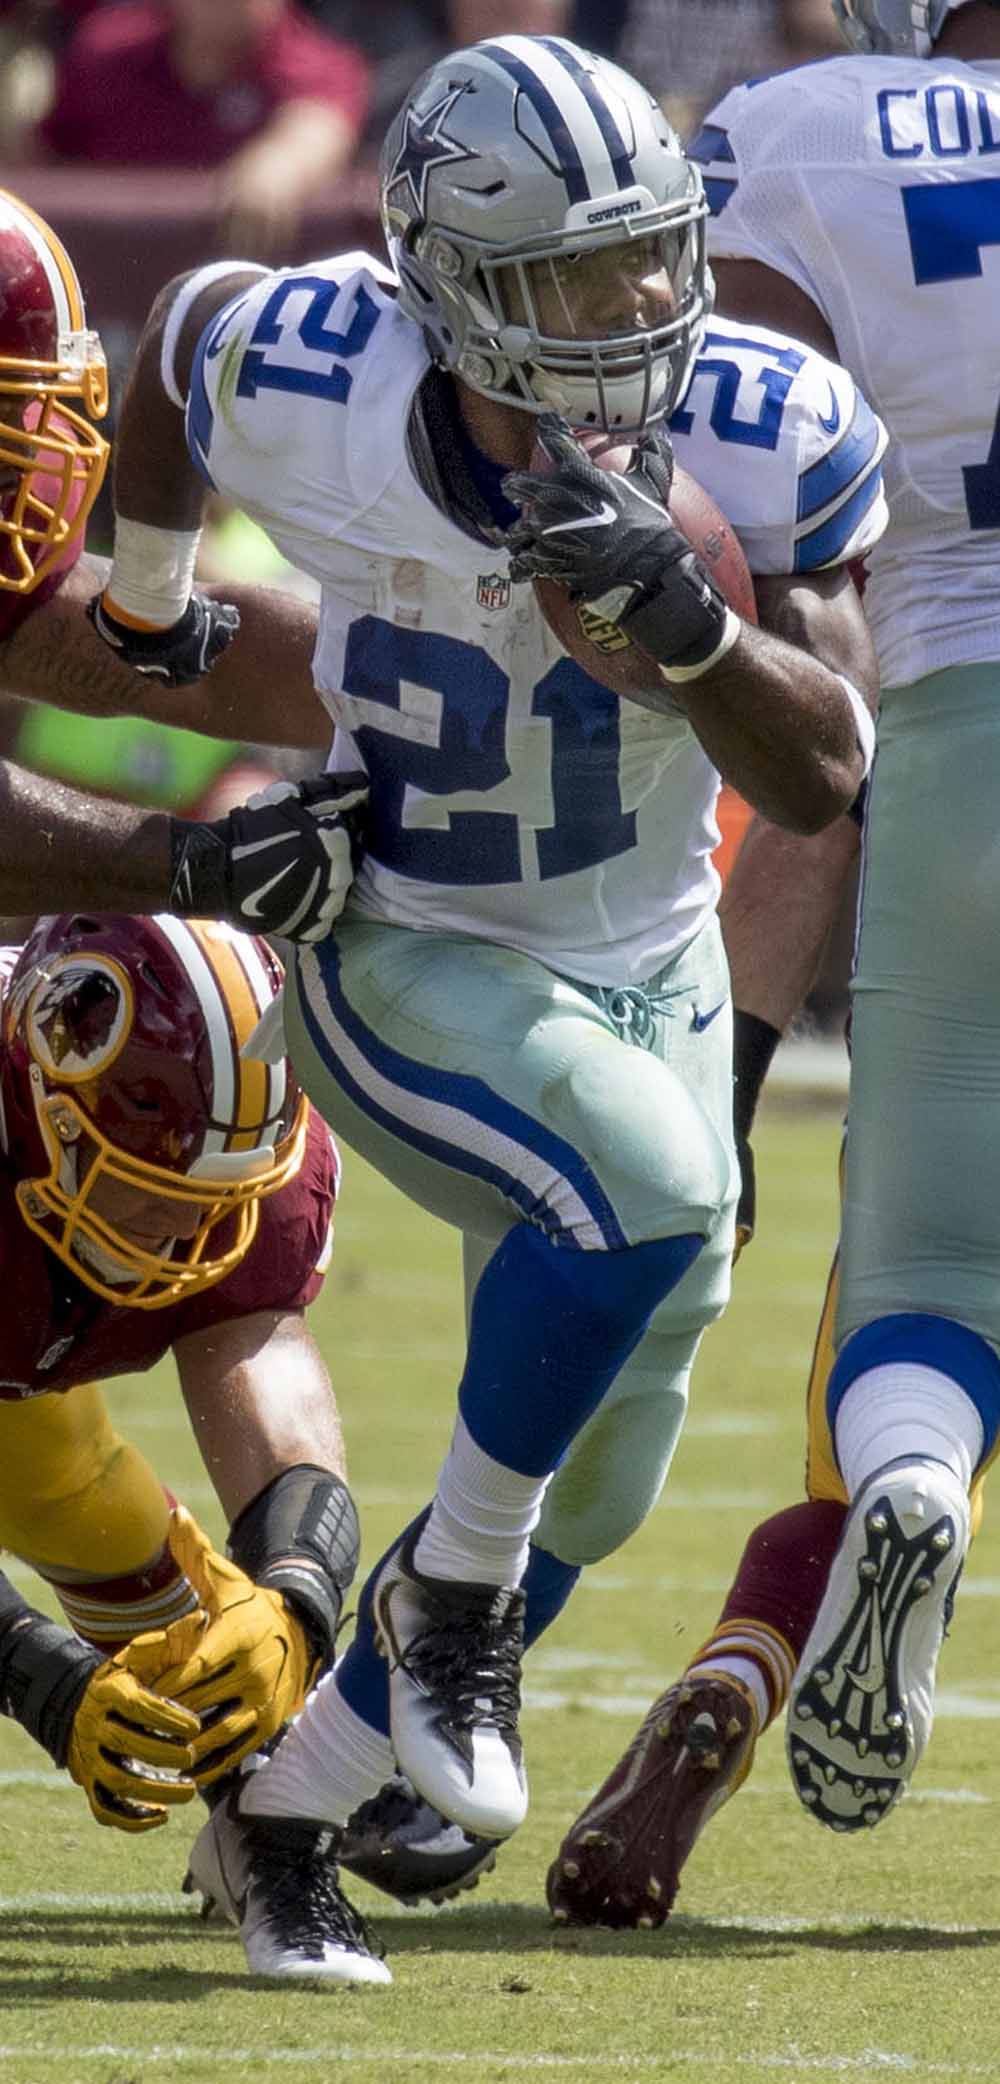 Ezekiel Elliott playing for the Dallas Cowboys in the NFL. By Keith Allison - https://www.flickr.com/photos/keithallison/29150185404, CC BY-SA 2.0, https://commons.wikimedia.org/w/index.php?curid=52228416